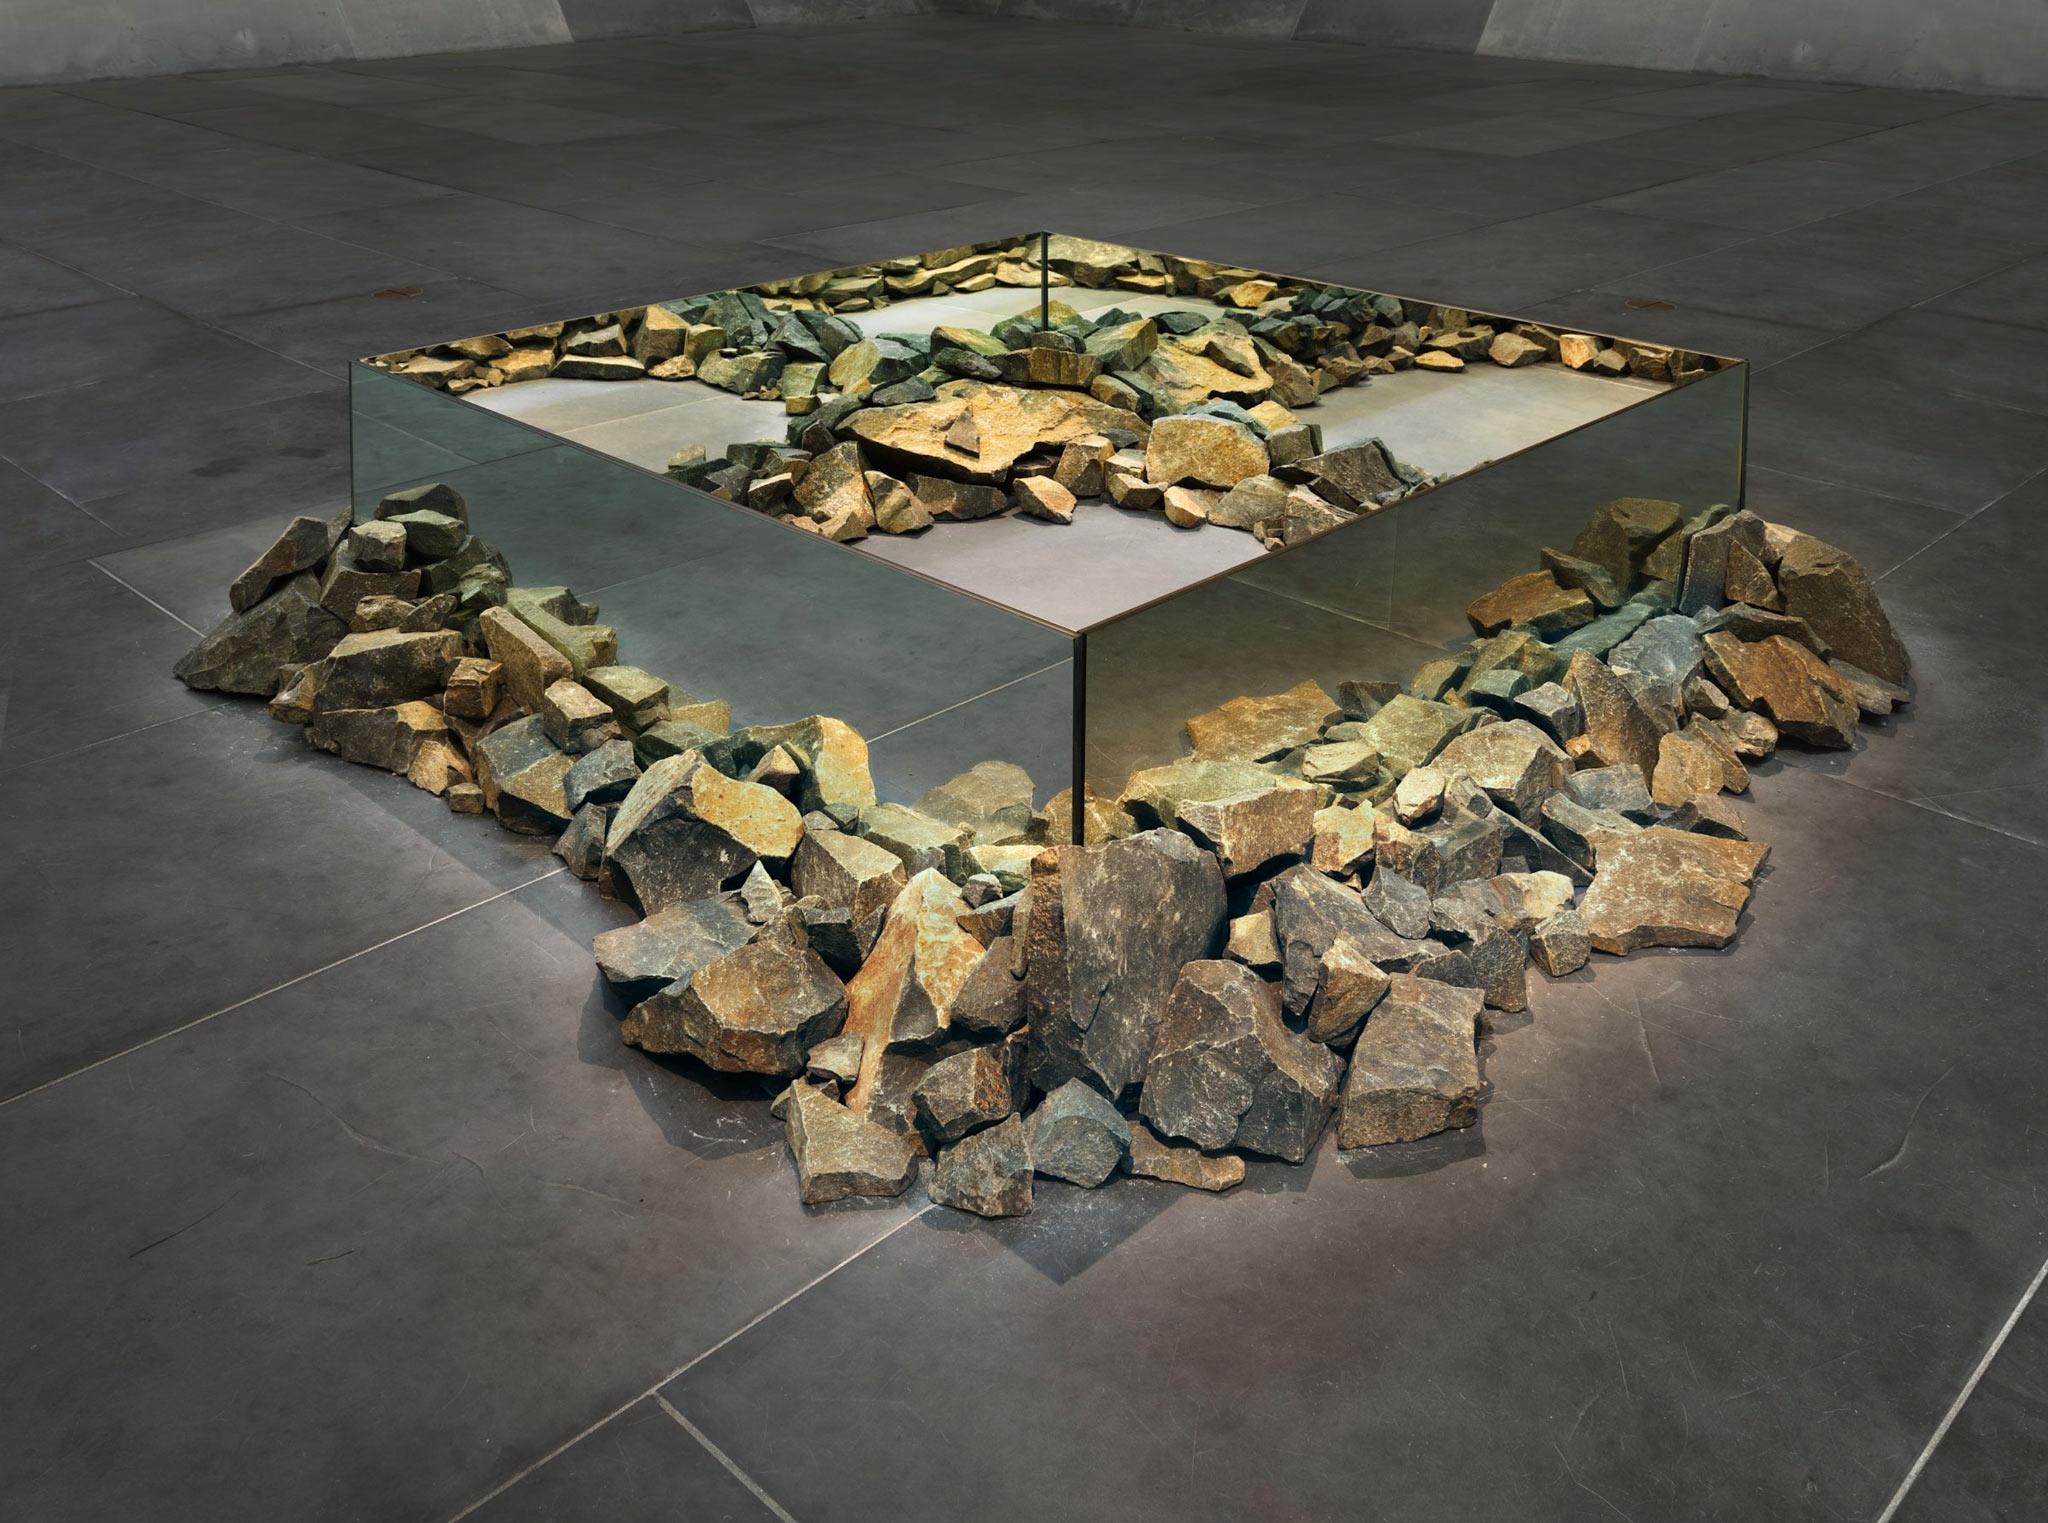 sculpture made using rocks and mirrors placed on the ground in a square shape